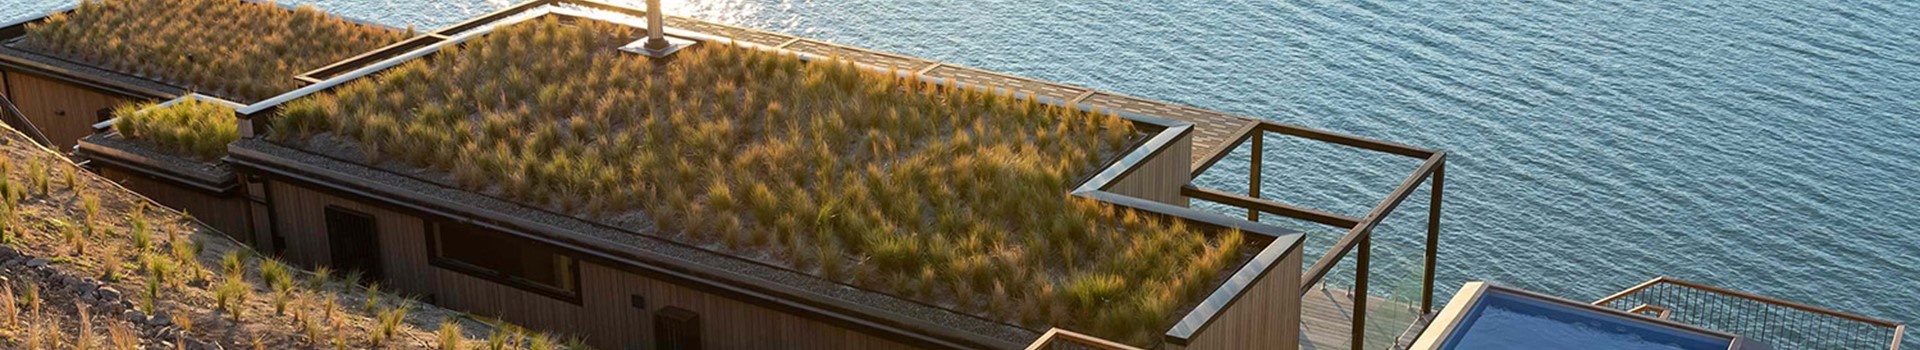 Roof Garden - bring your roof to life